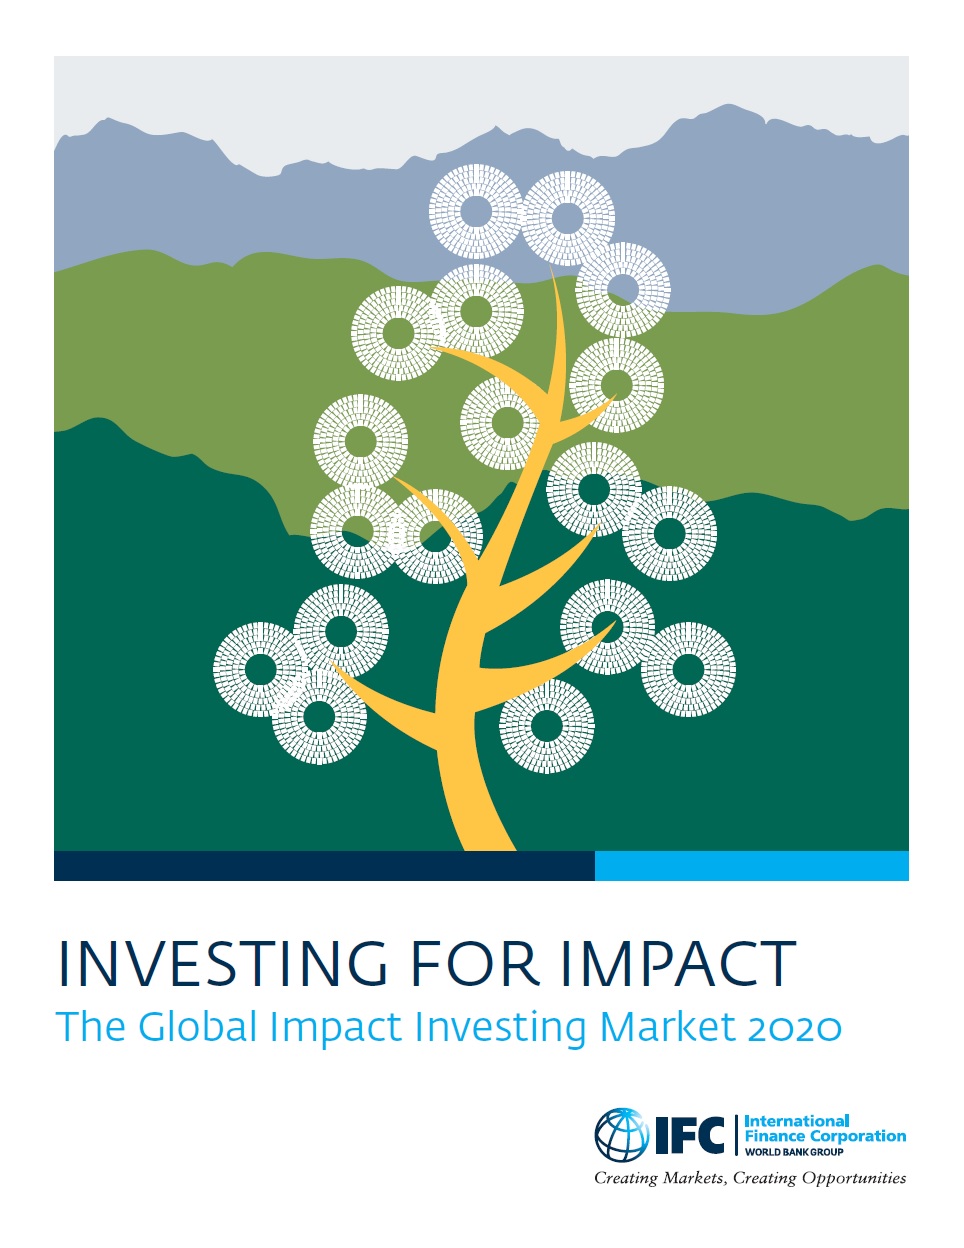 IFC - Investing for Impact